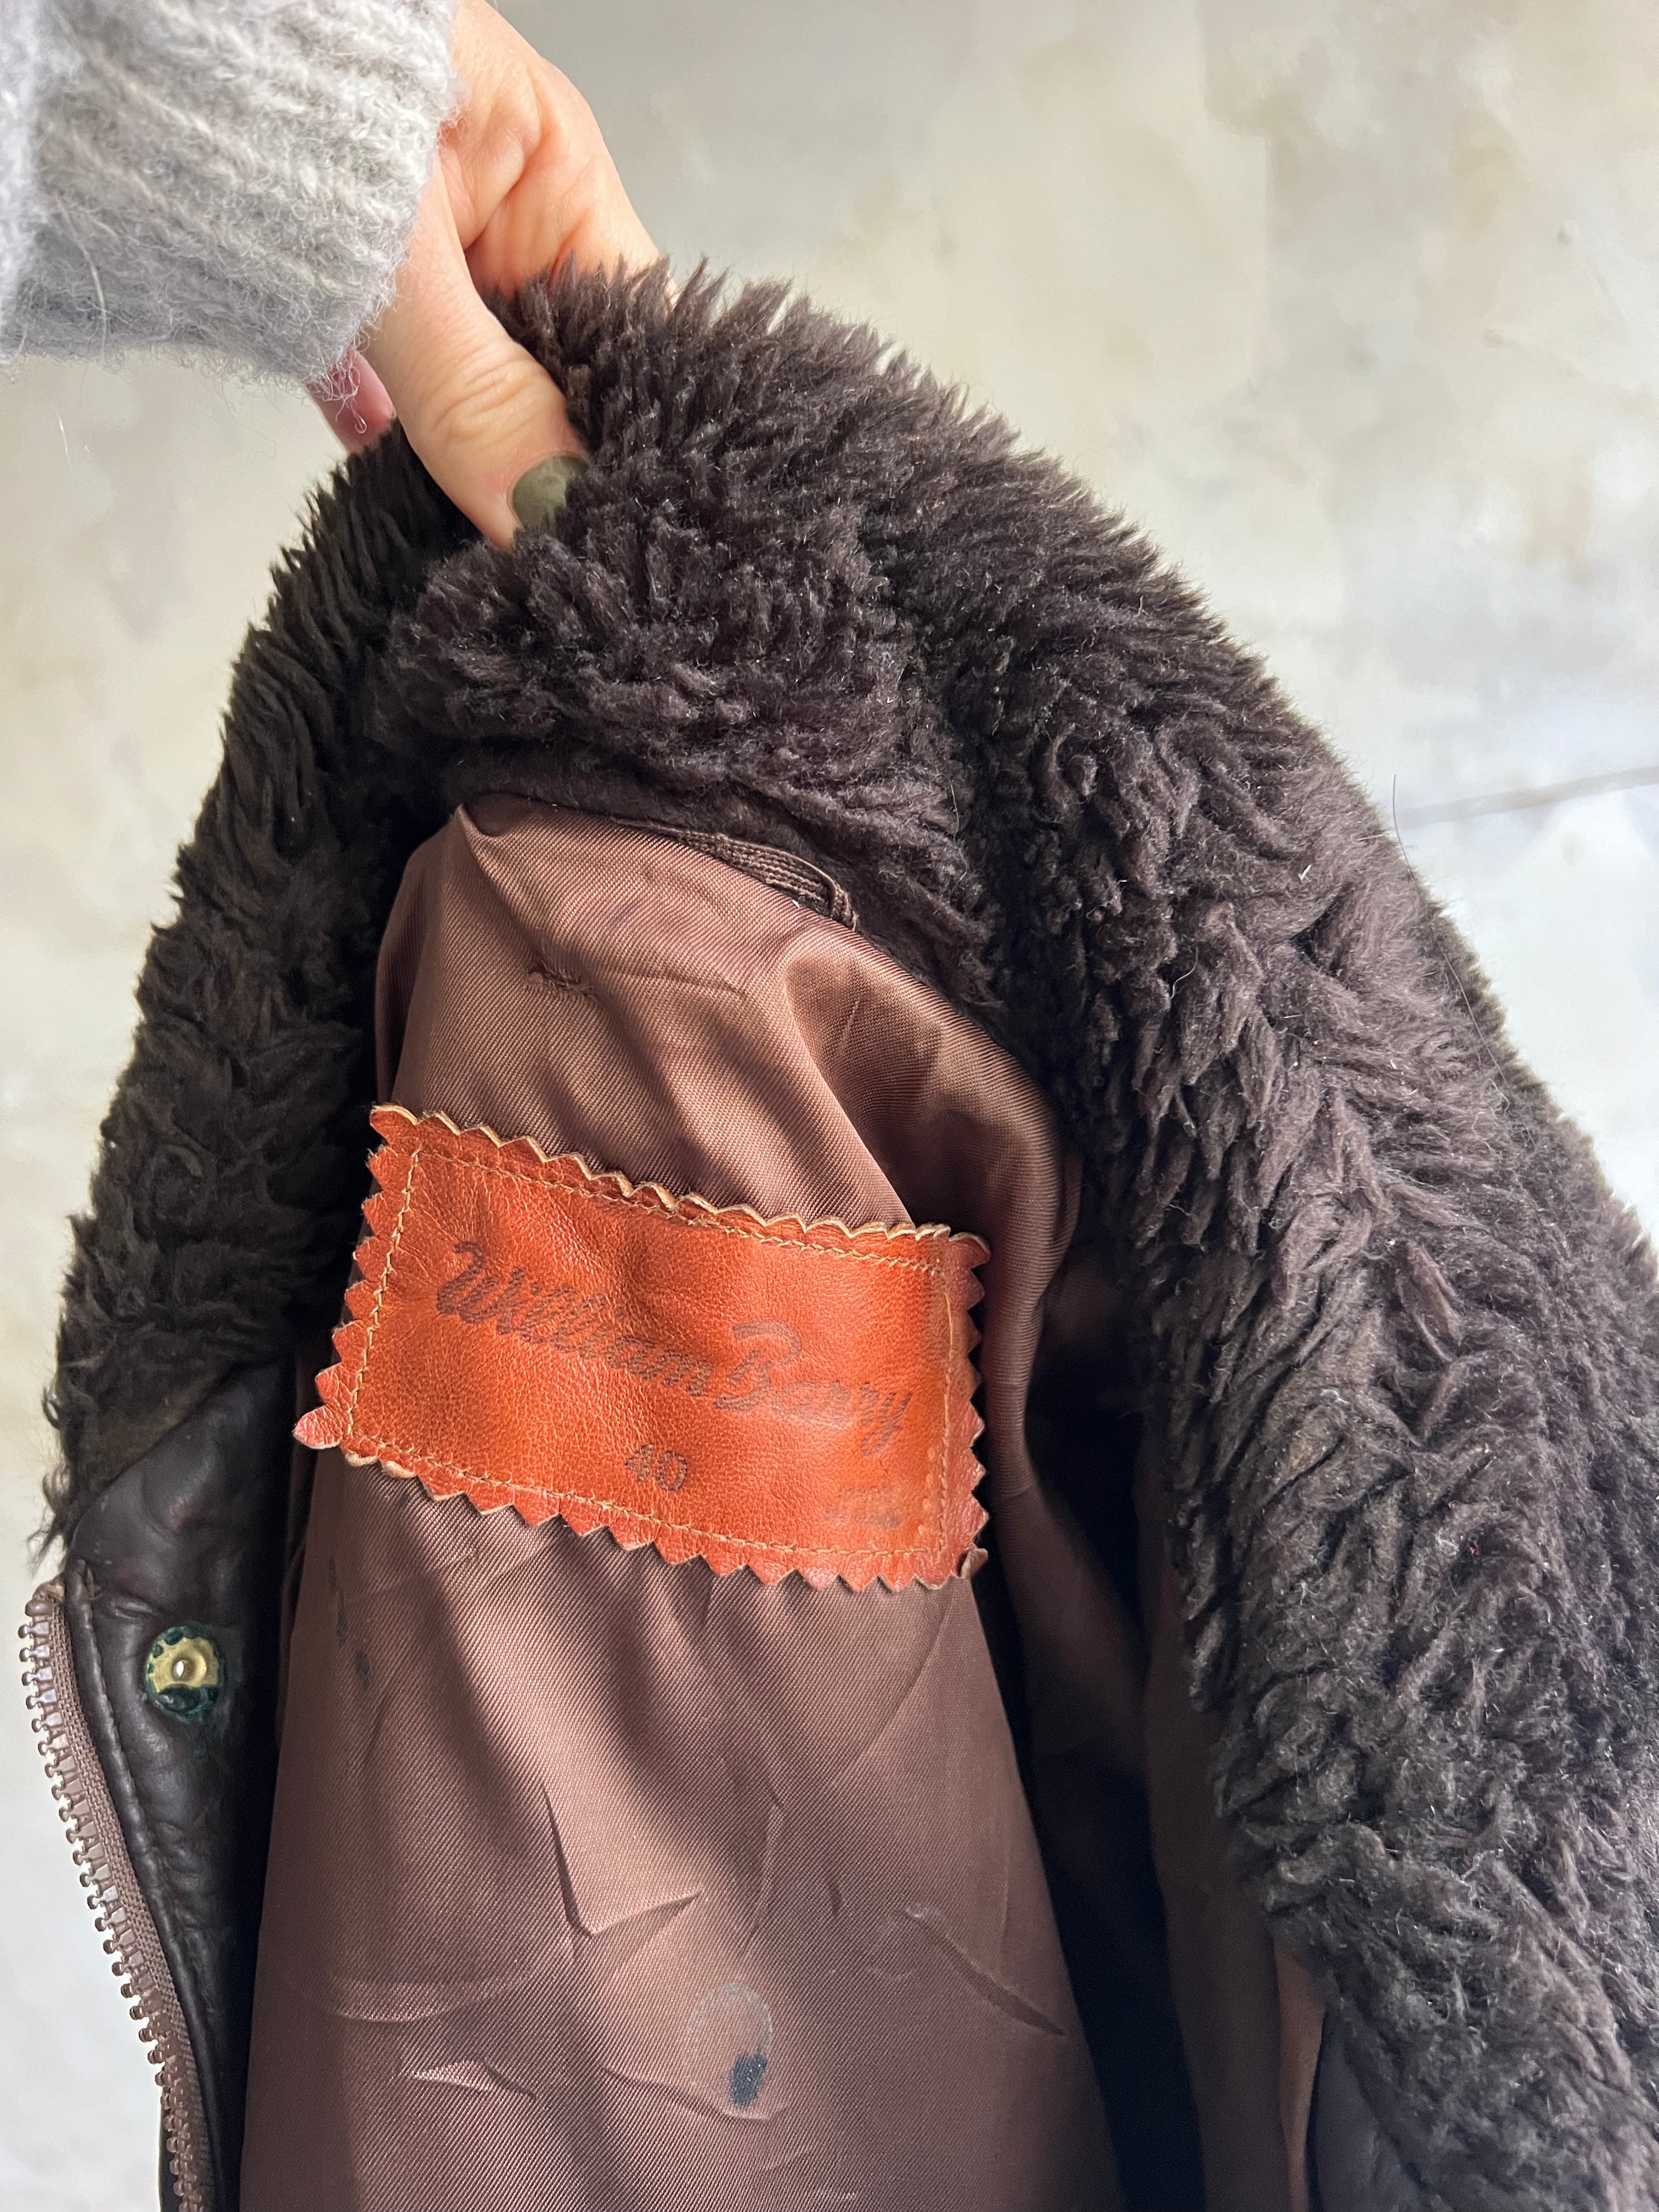 Brown Leather Bomber